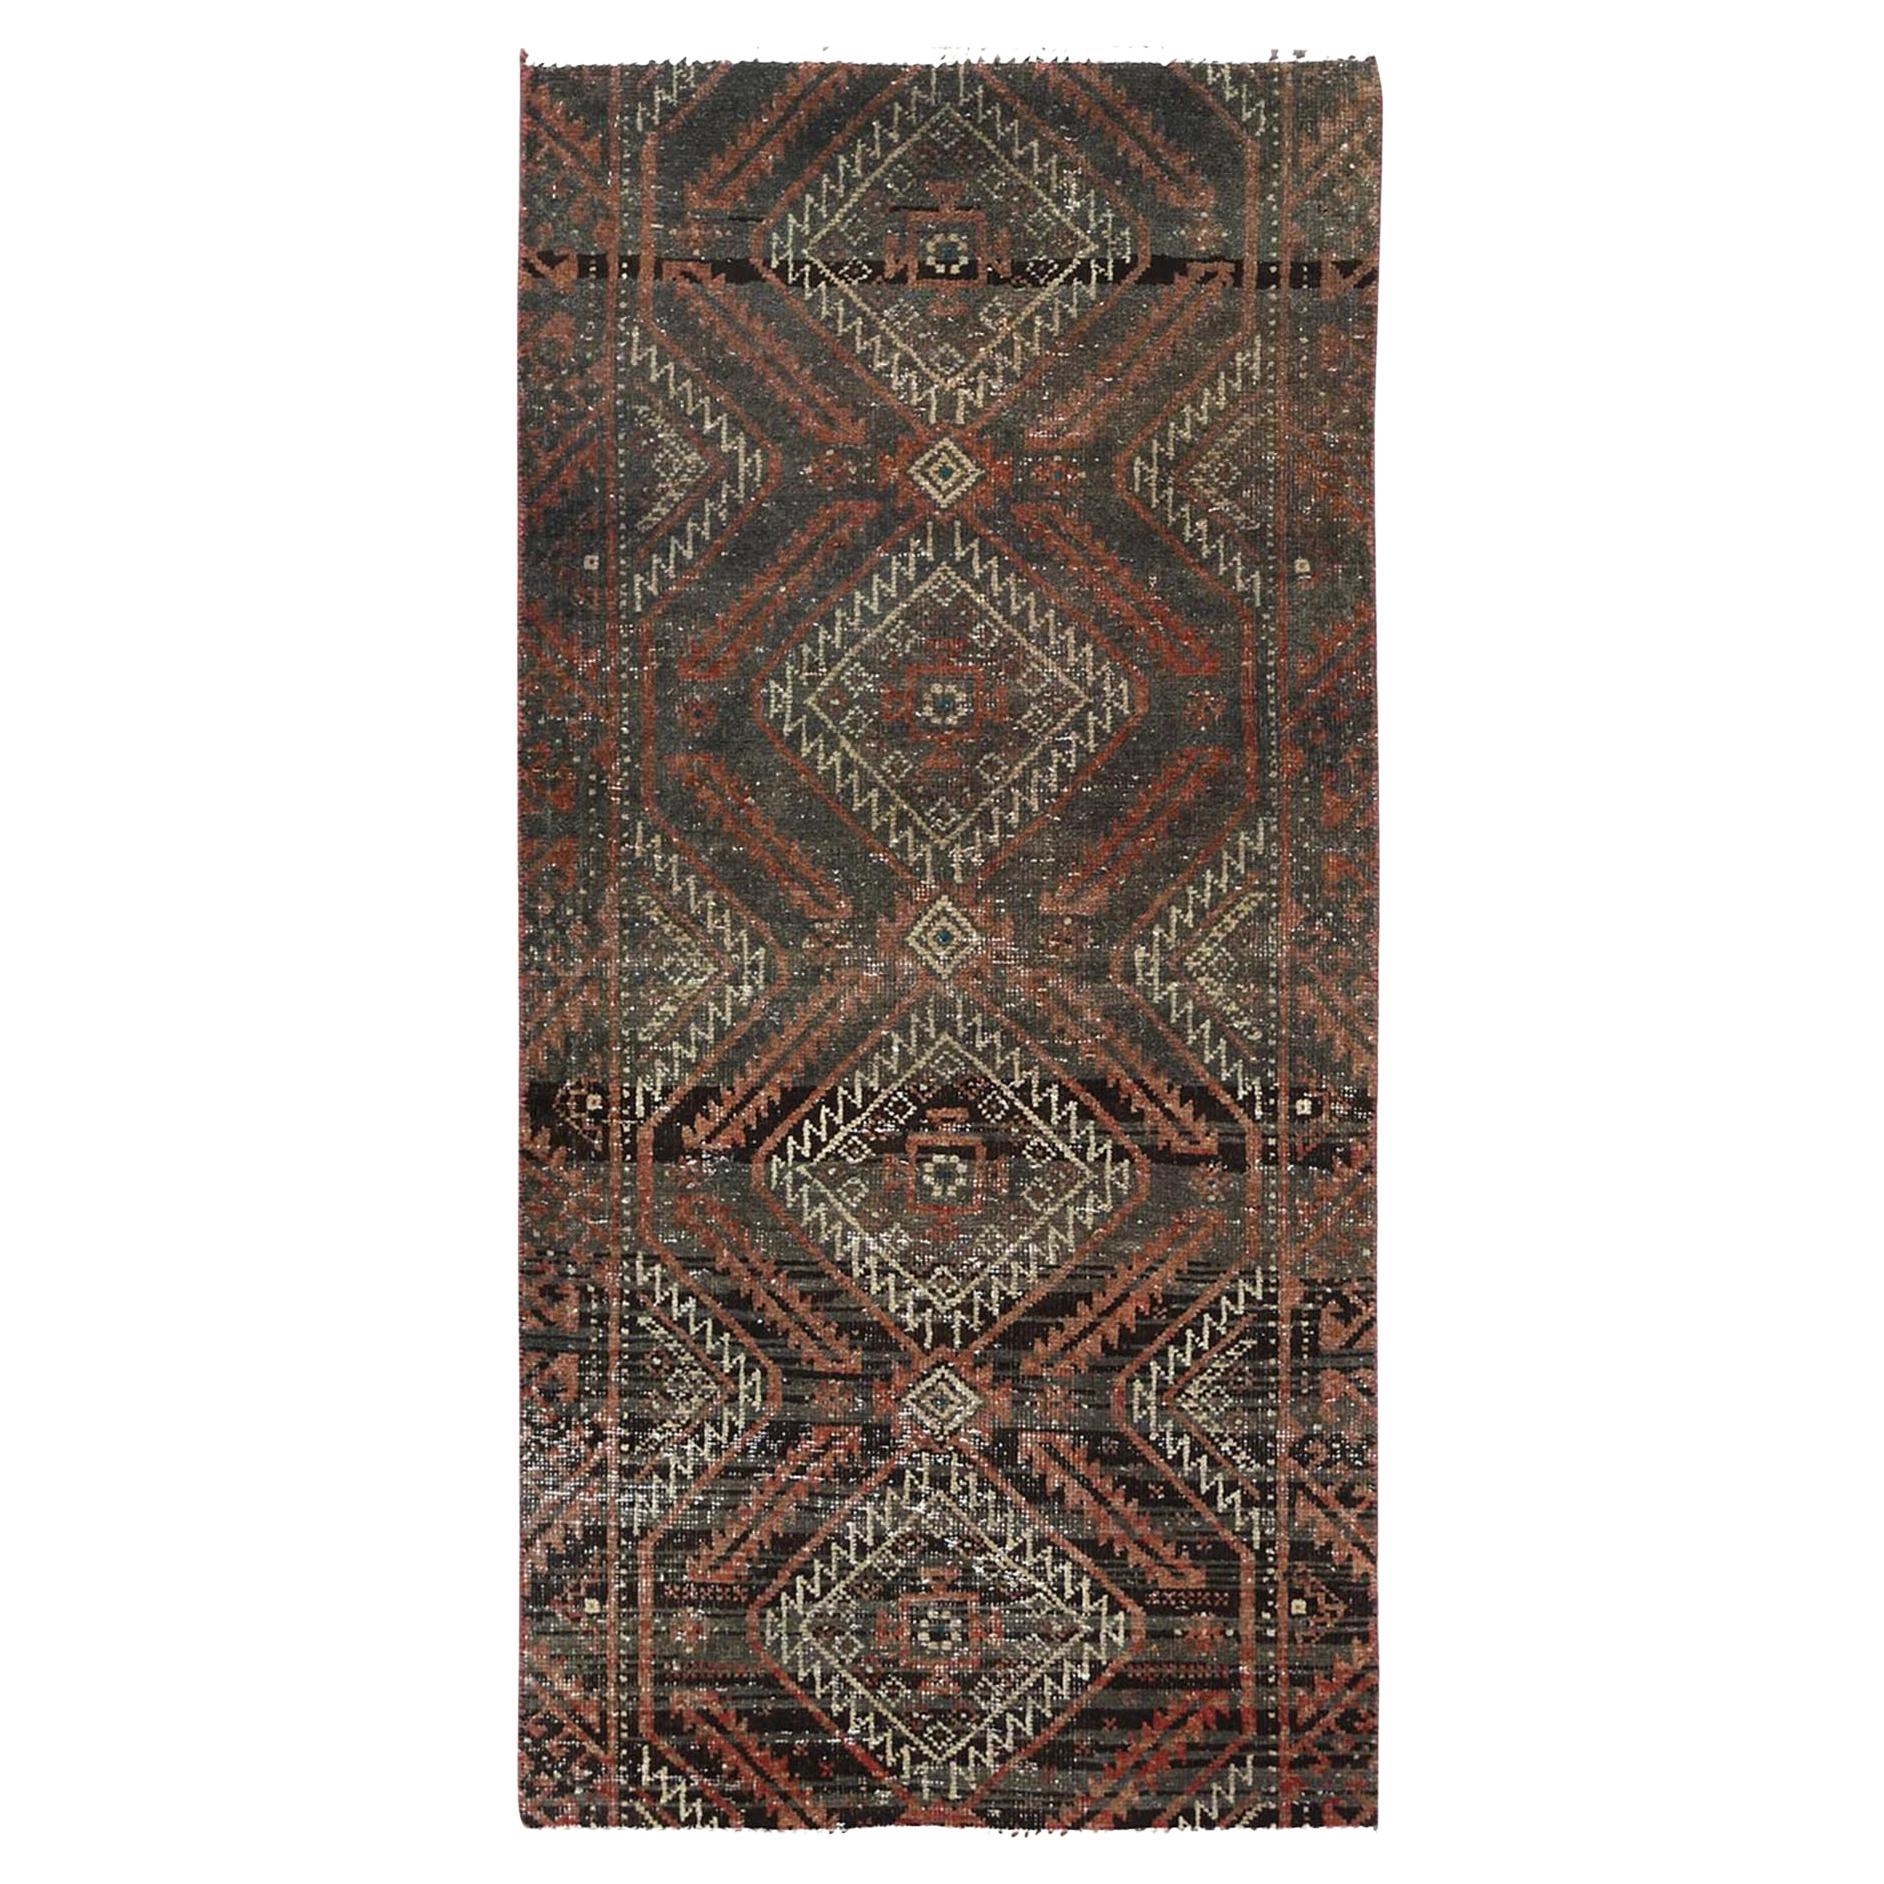 Brown Worn Down Wool Hand Knotted Bohemian Vintage Persian Baluch Runner Rug